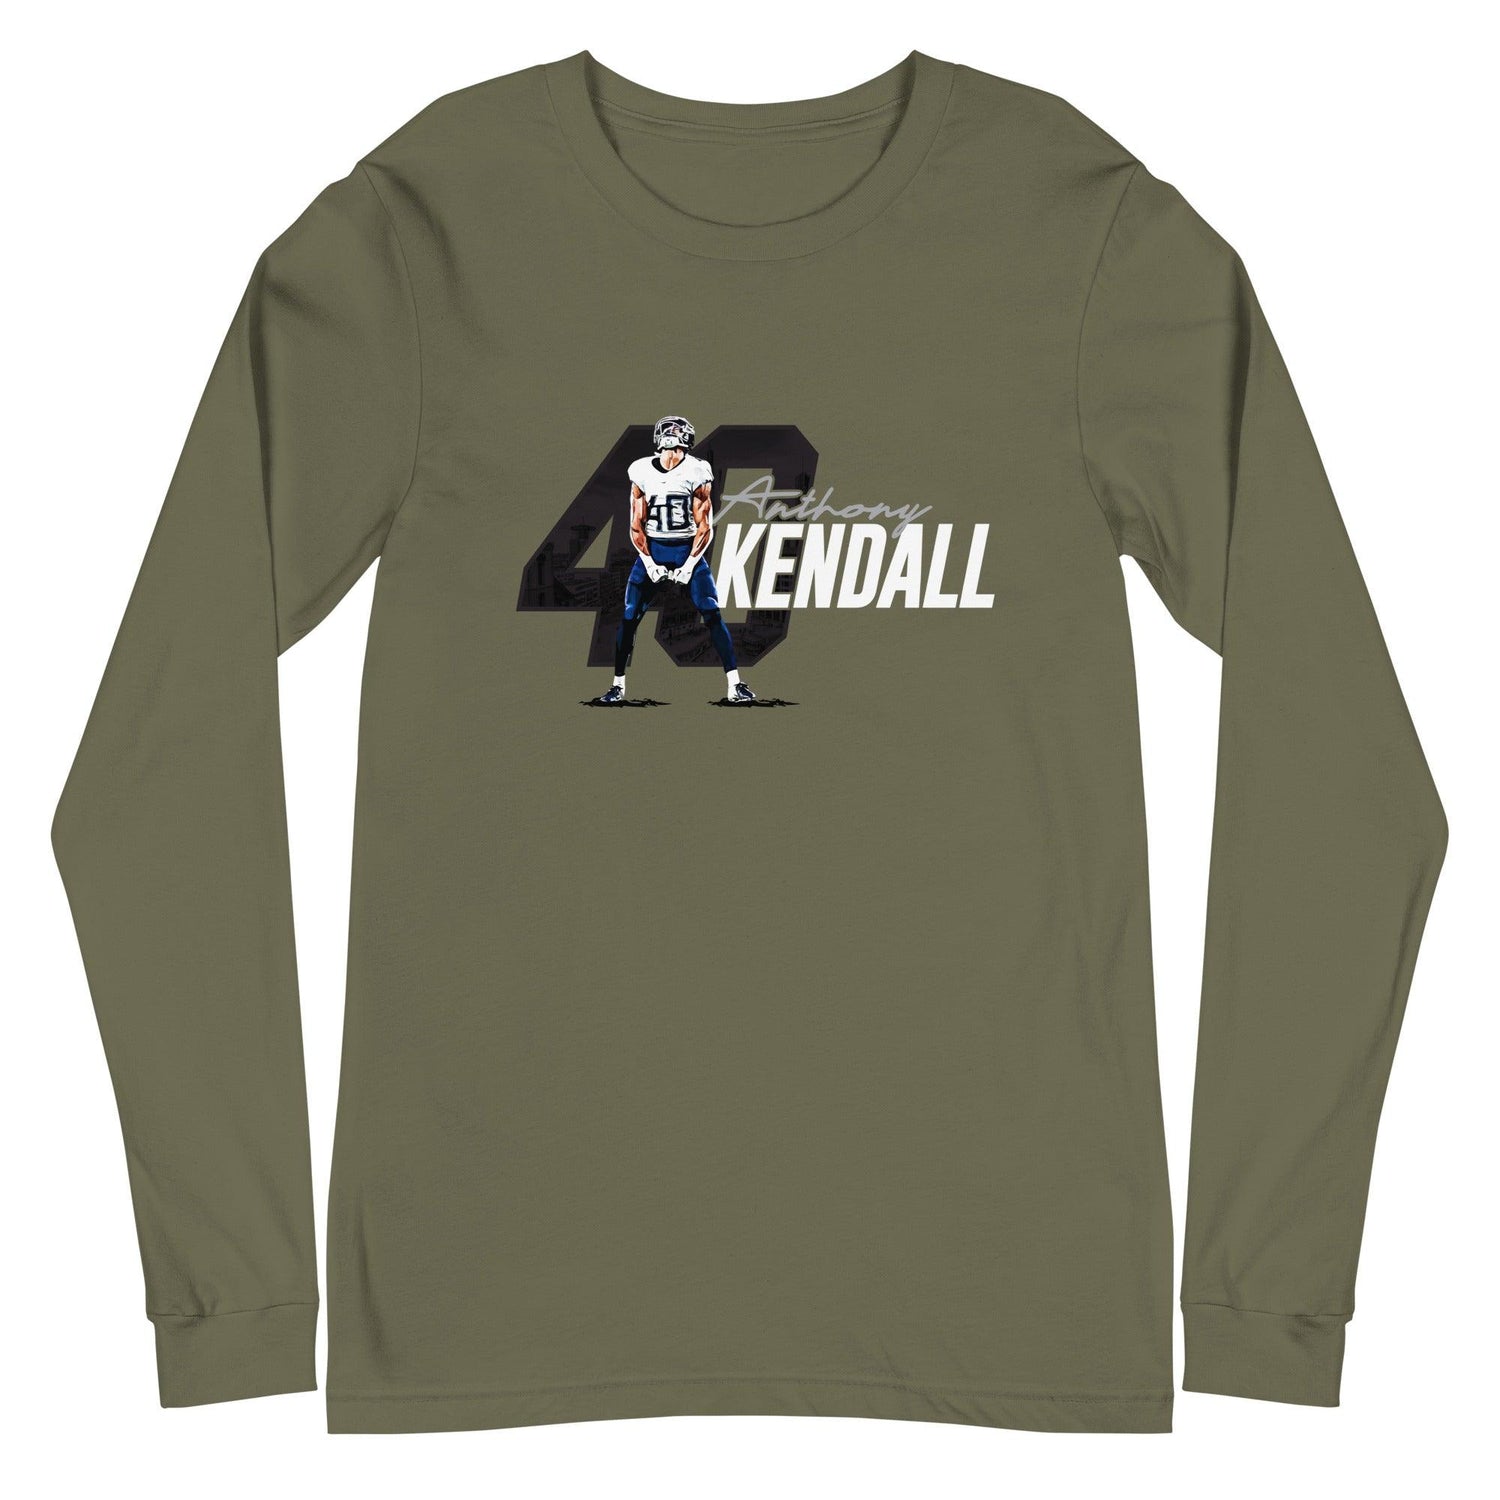 Anthony Kendall "Neutral" Long Sleeve Tee - Fan Arch